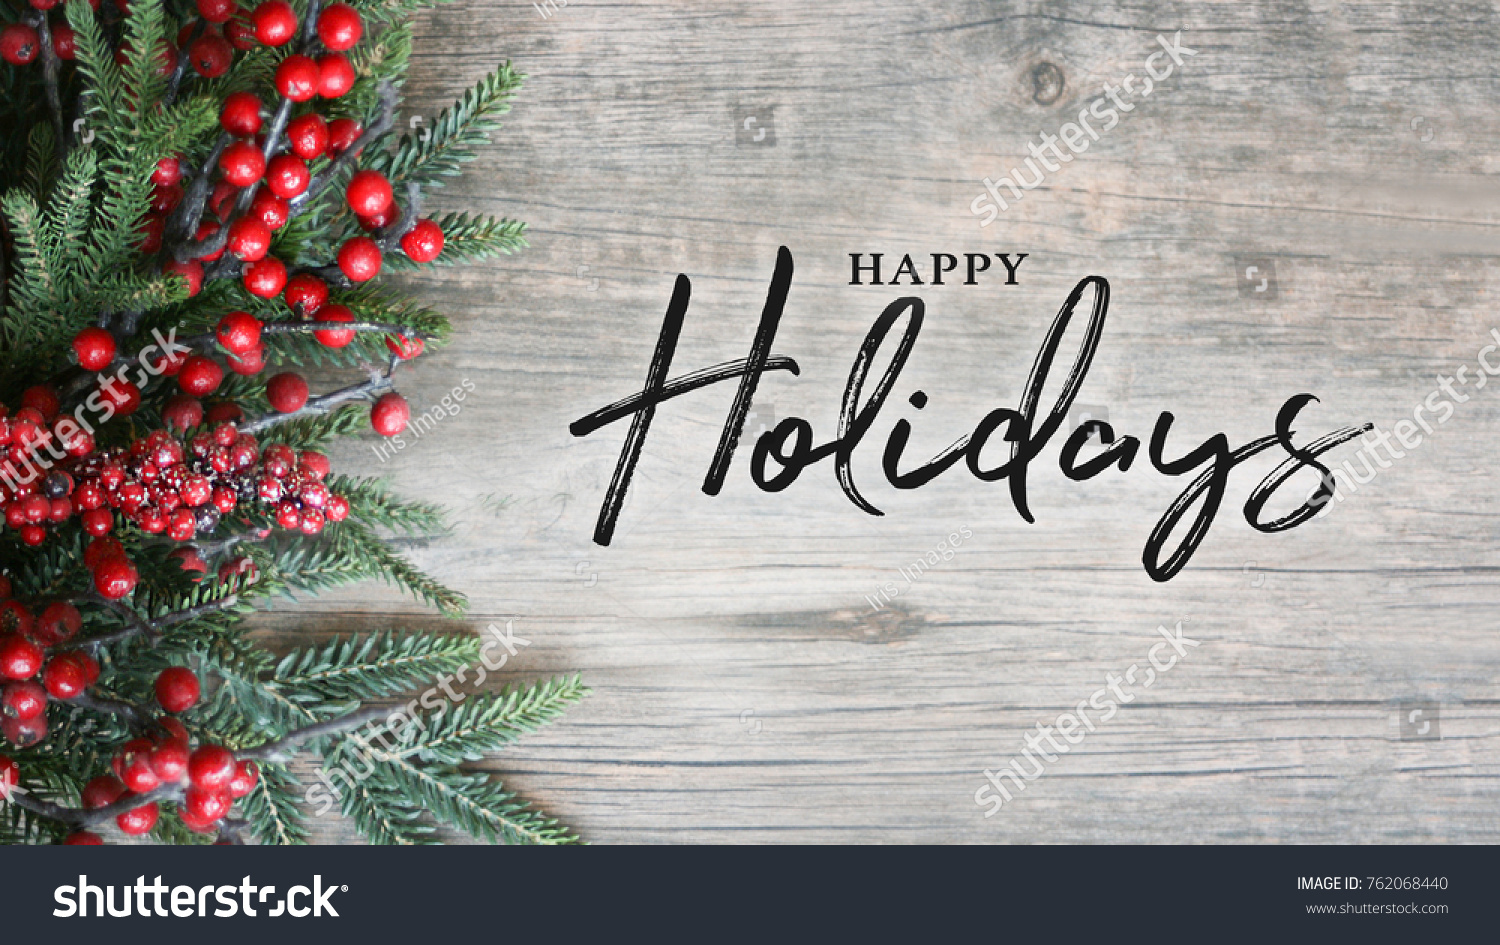 Happy Holidays Text with Holiday Evergreen Branches and Berries in Corner Over Rustic Wooden Background #762068440